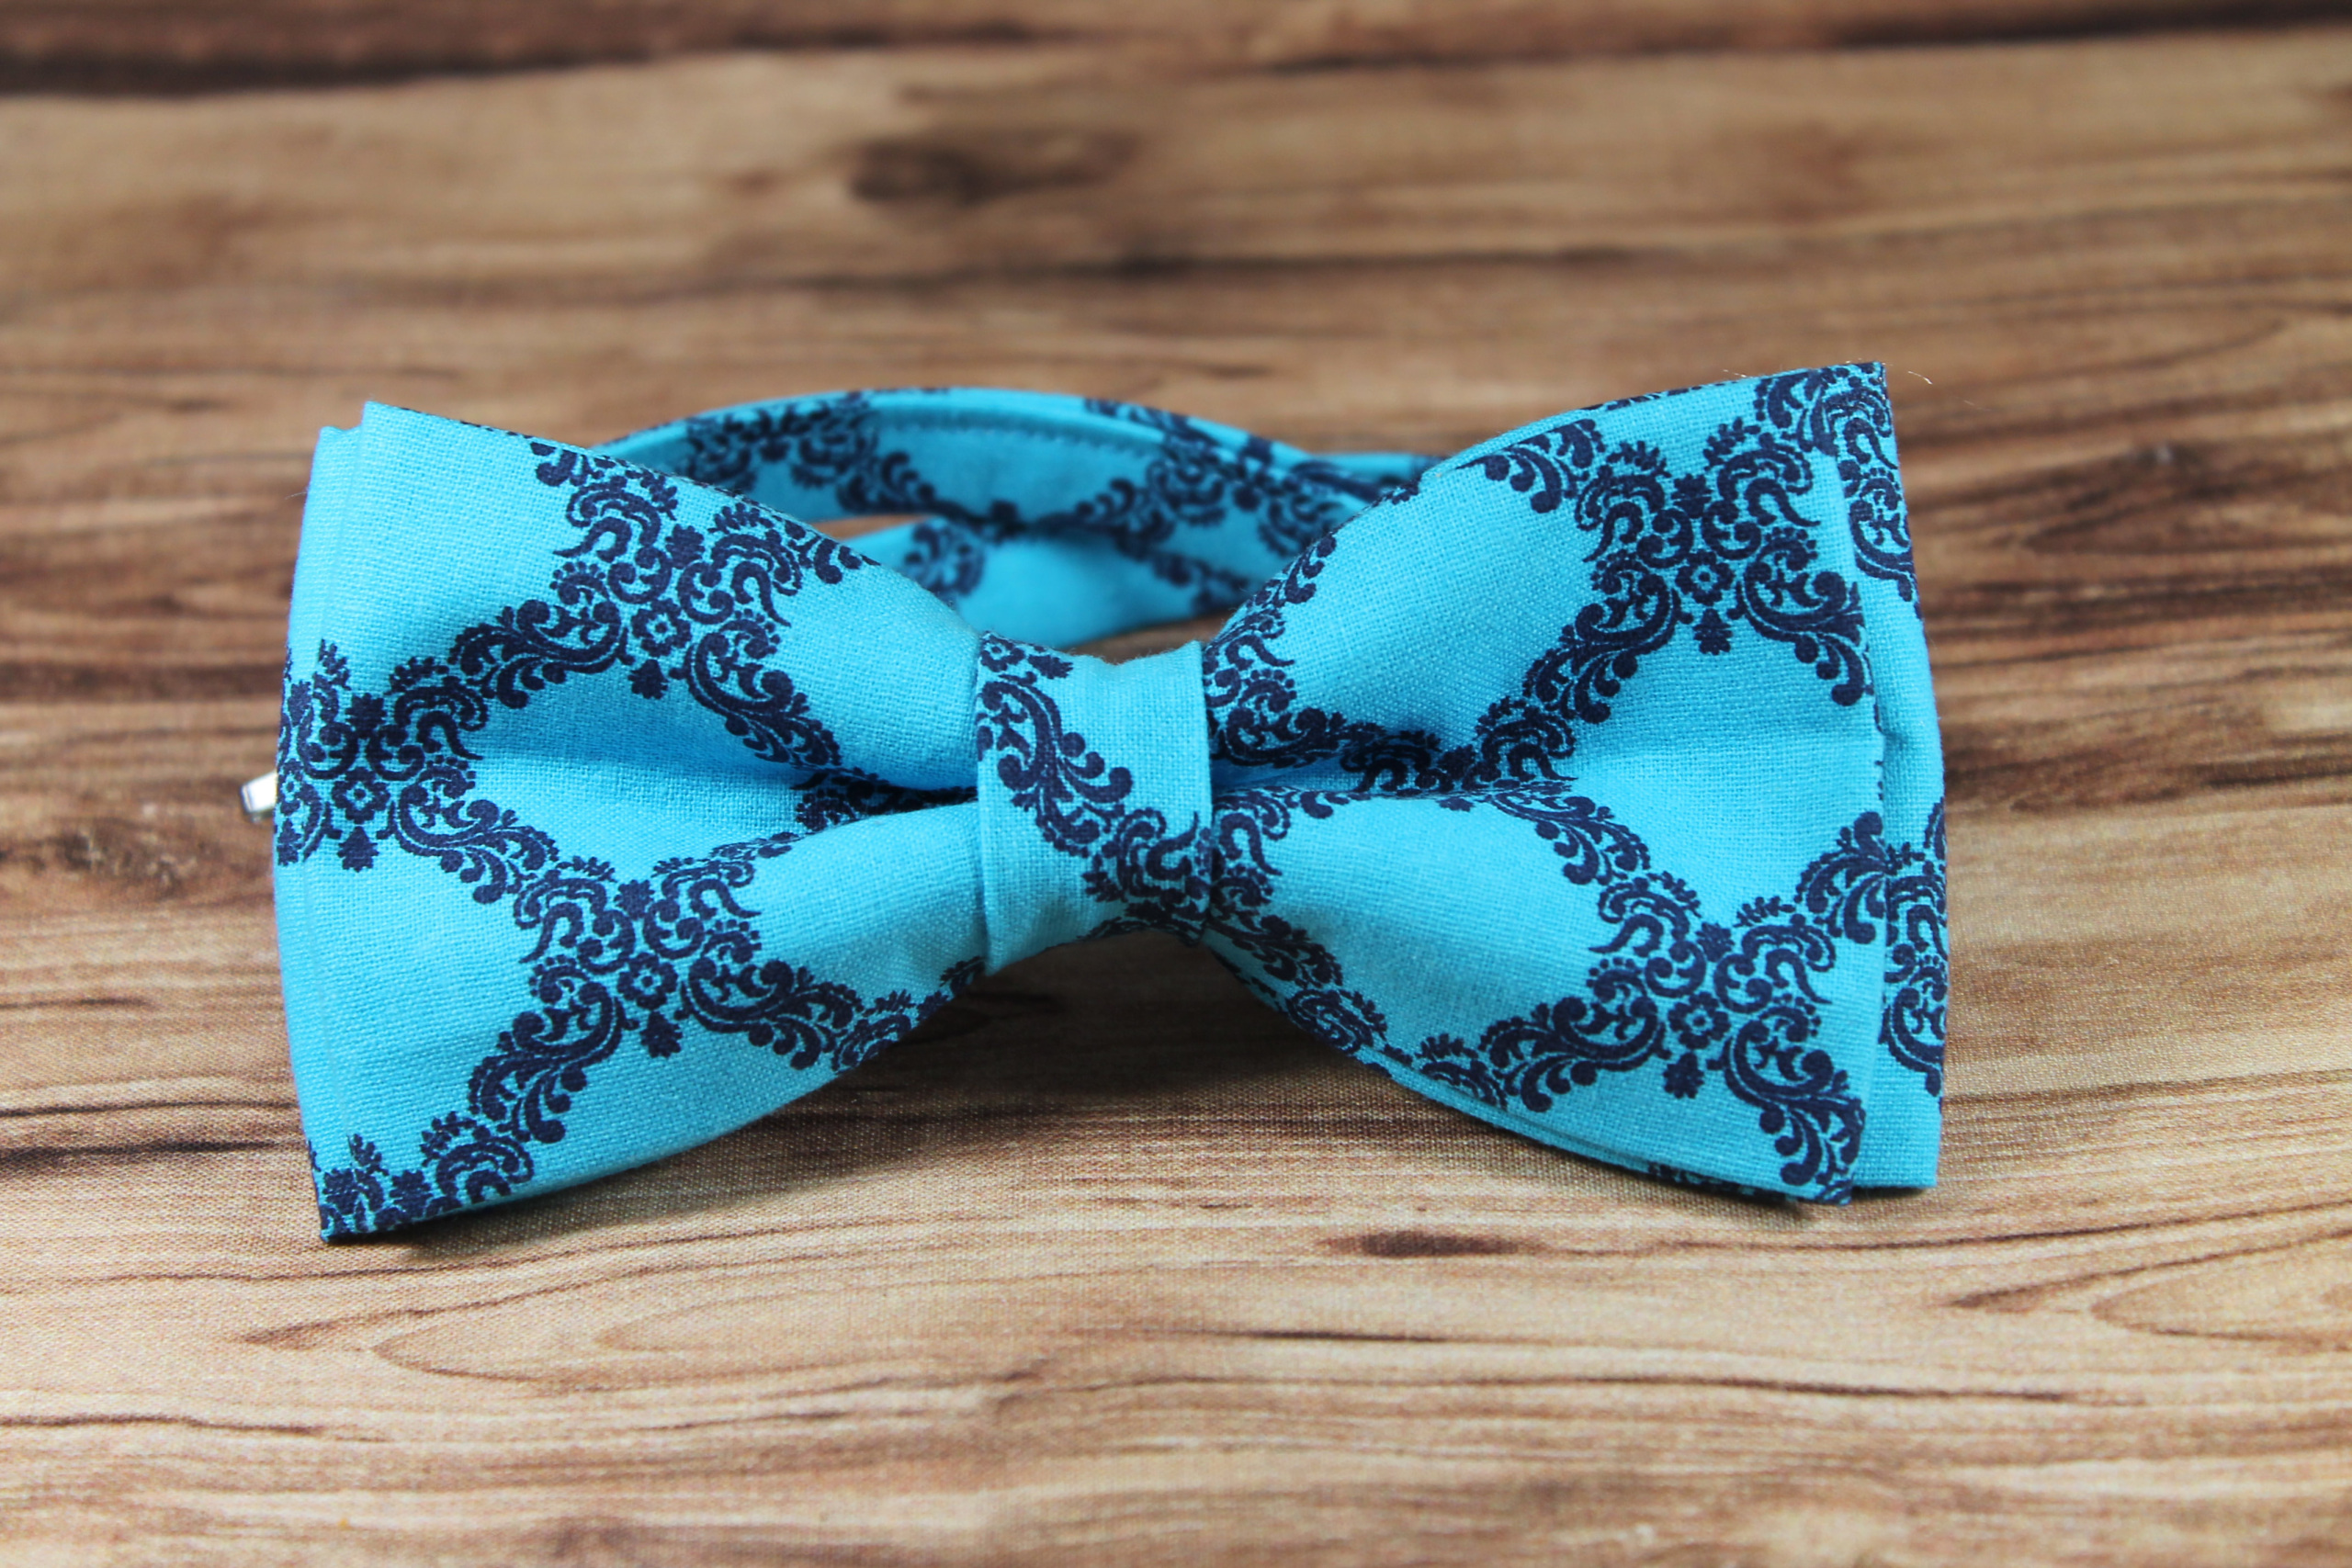 embroidered wooden bow tie The Intrepid turquoise